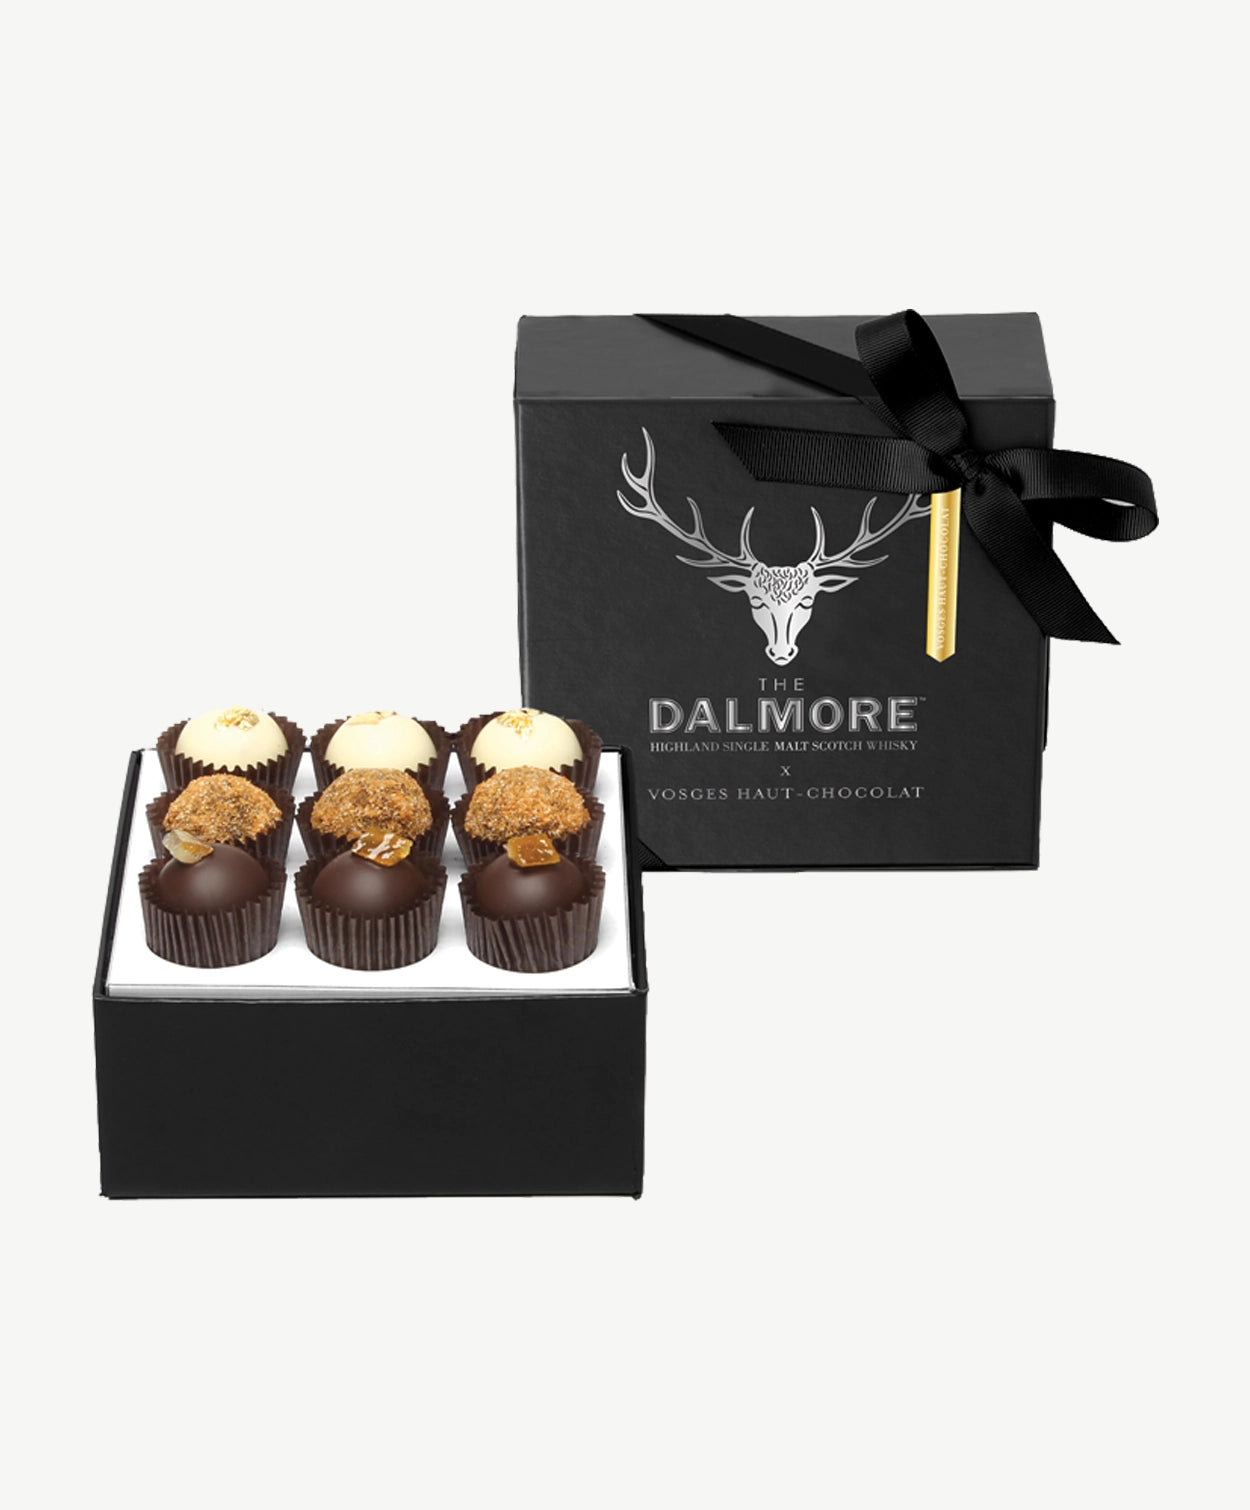 Product Detail  Dalmore 18 Years Old Highland Single Malt Scotch Whisky